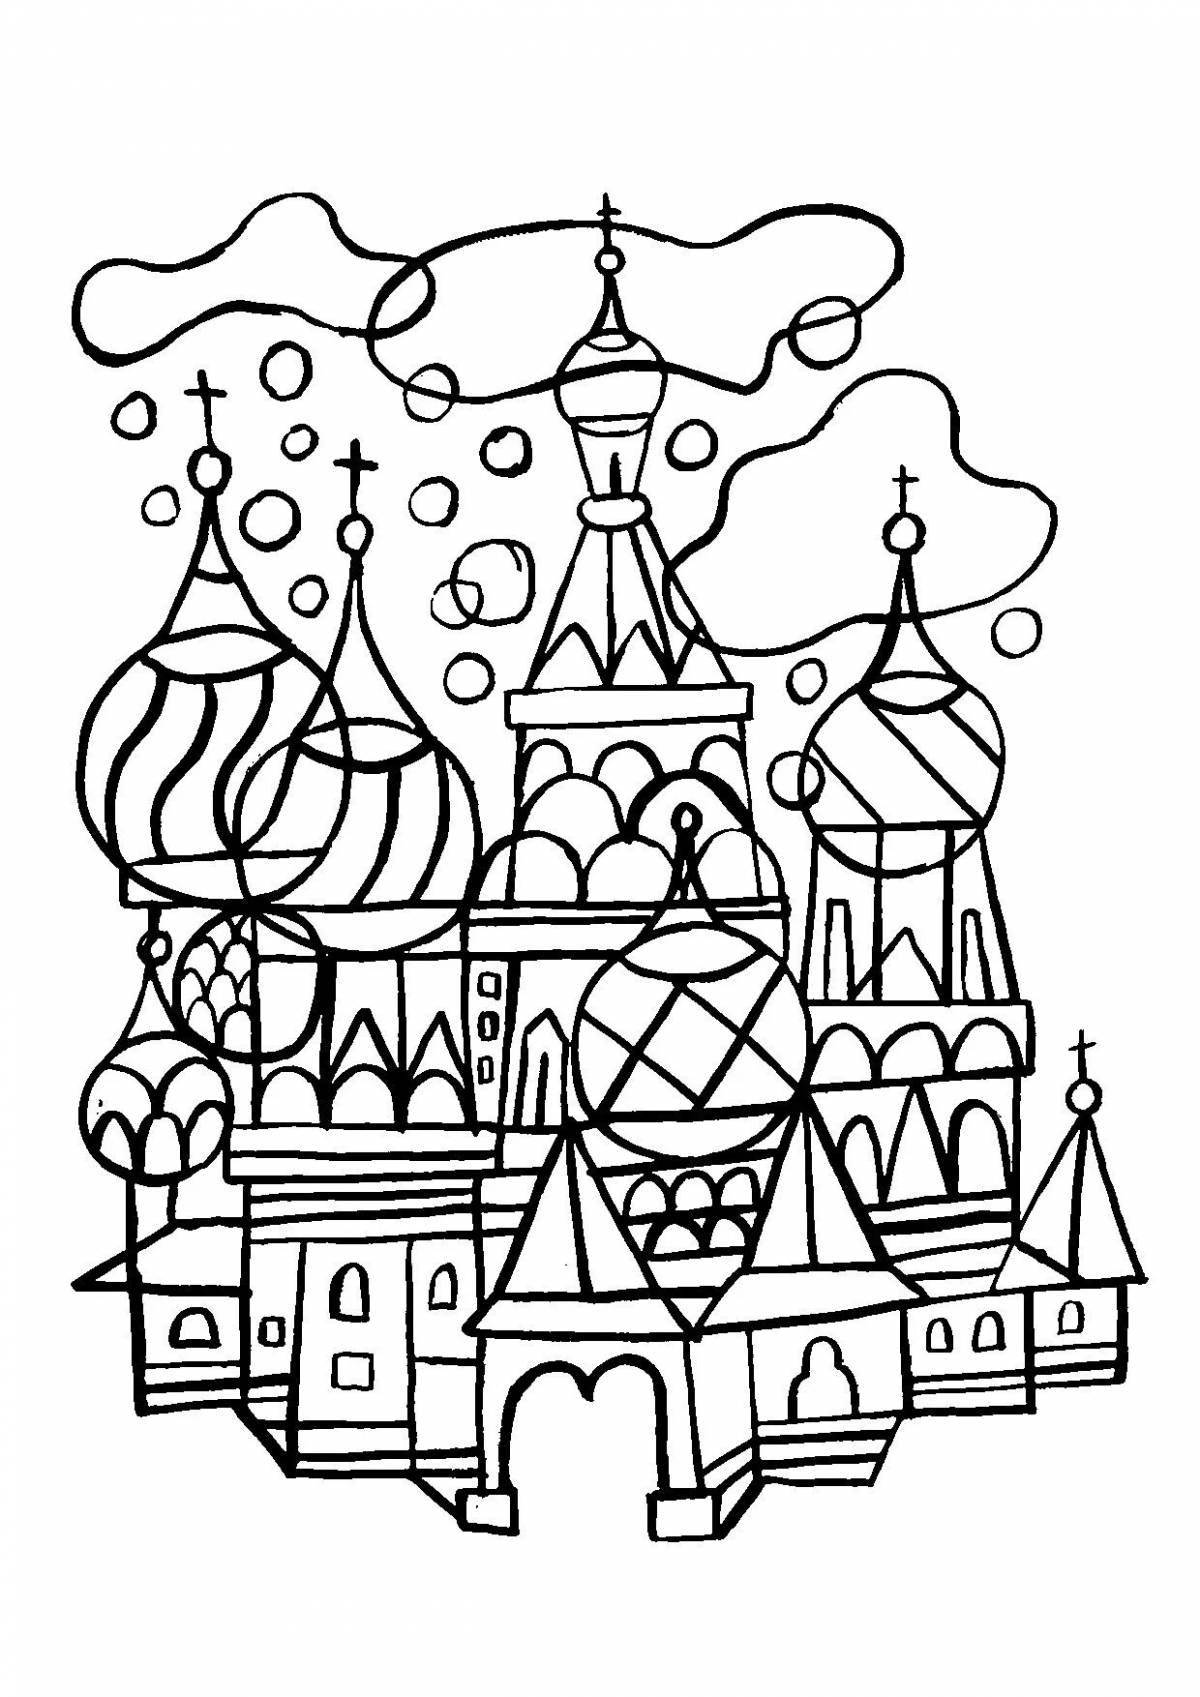 Coloring page charming saint basil's cathedral